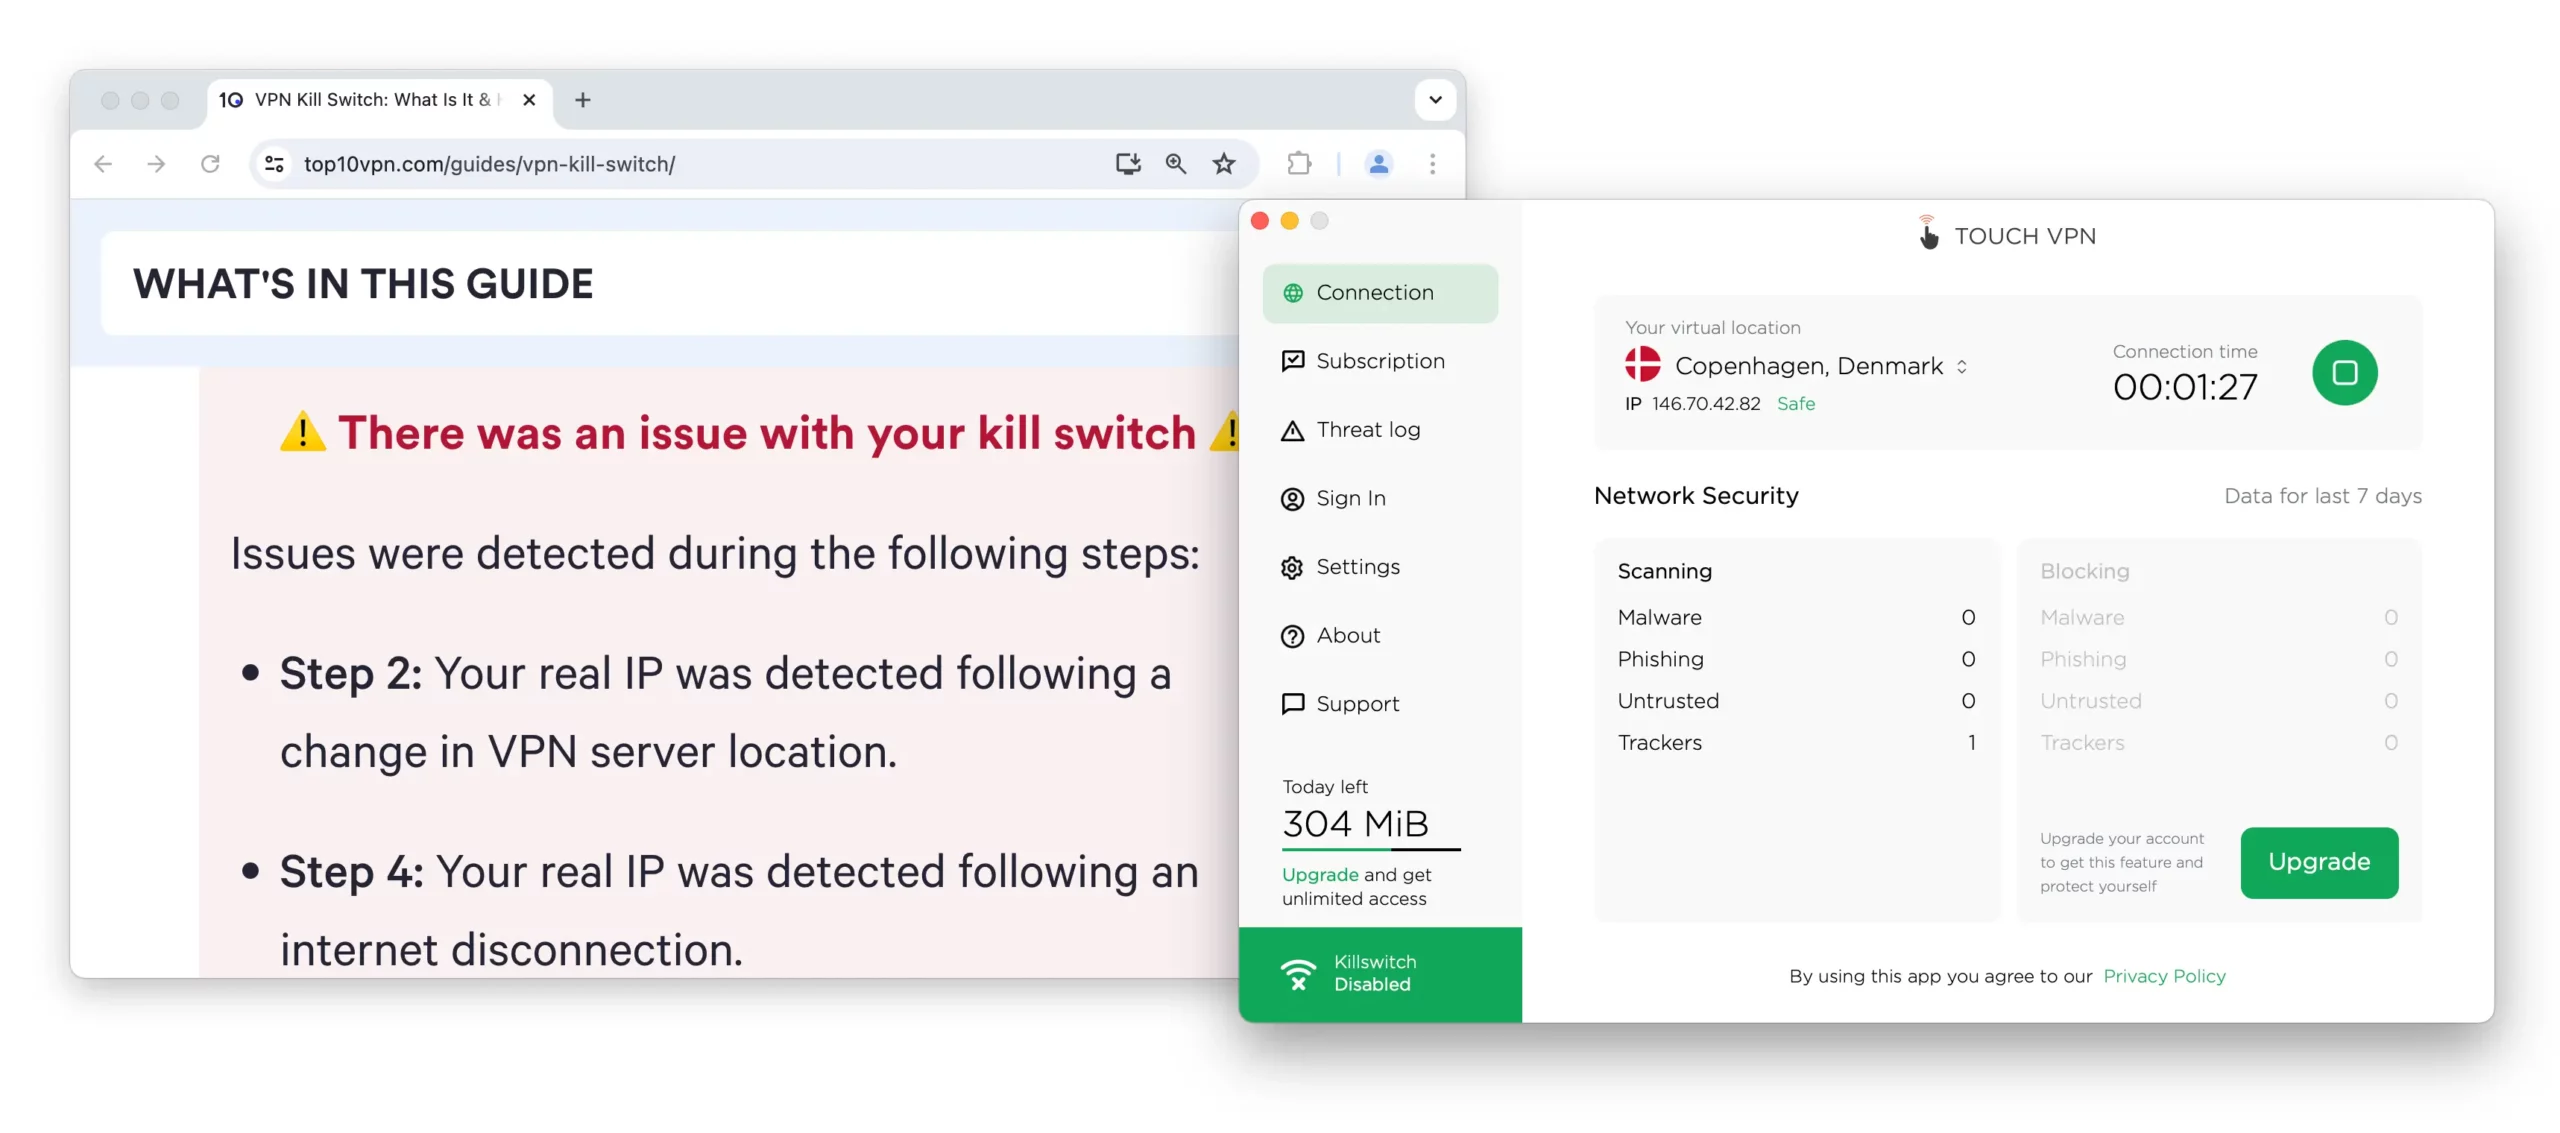 Touch VPN kill switch testing tool results